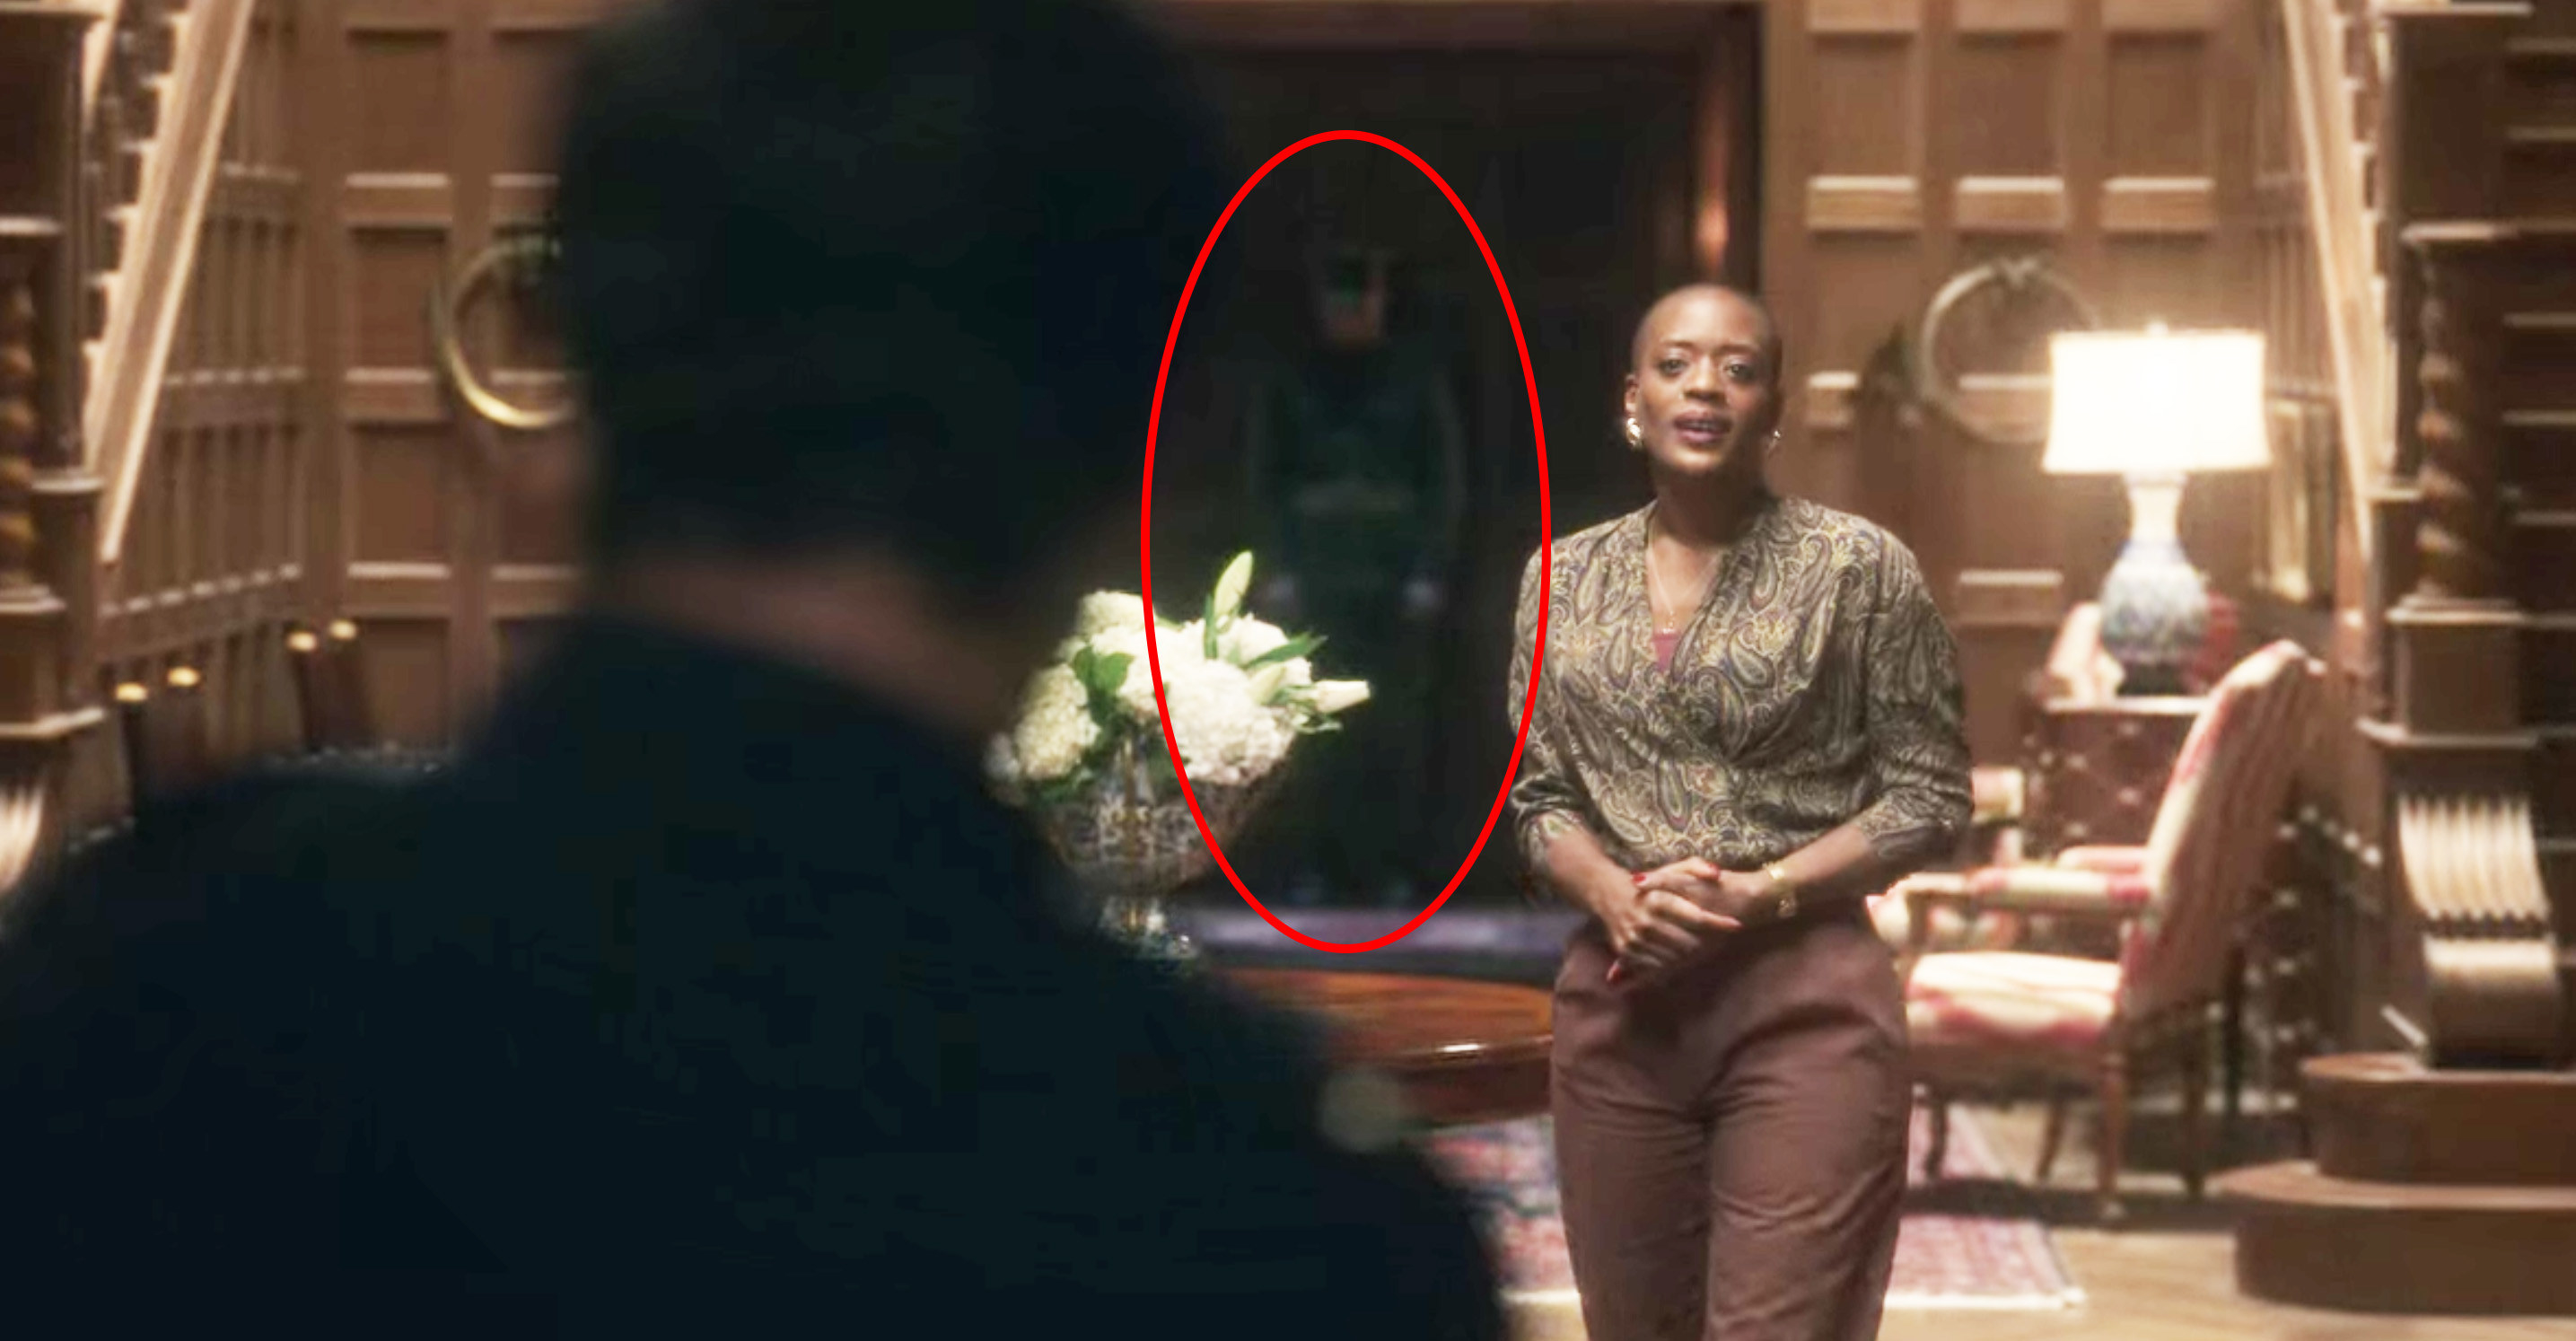 The soldier ghost standing behind Hannah